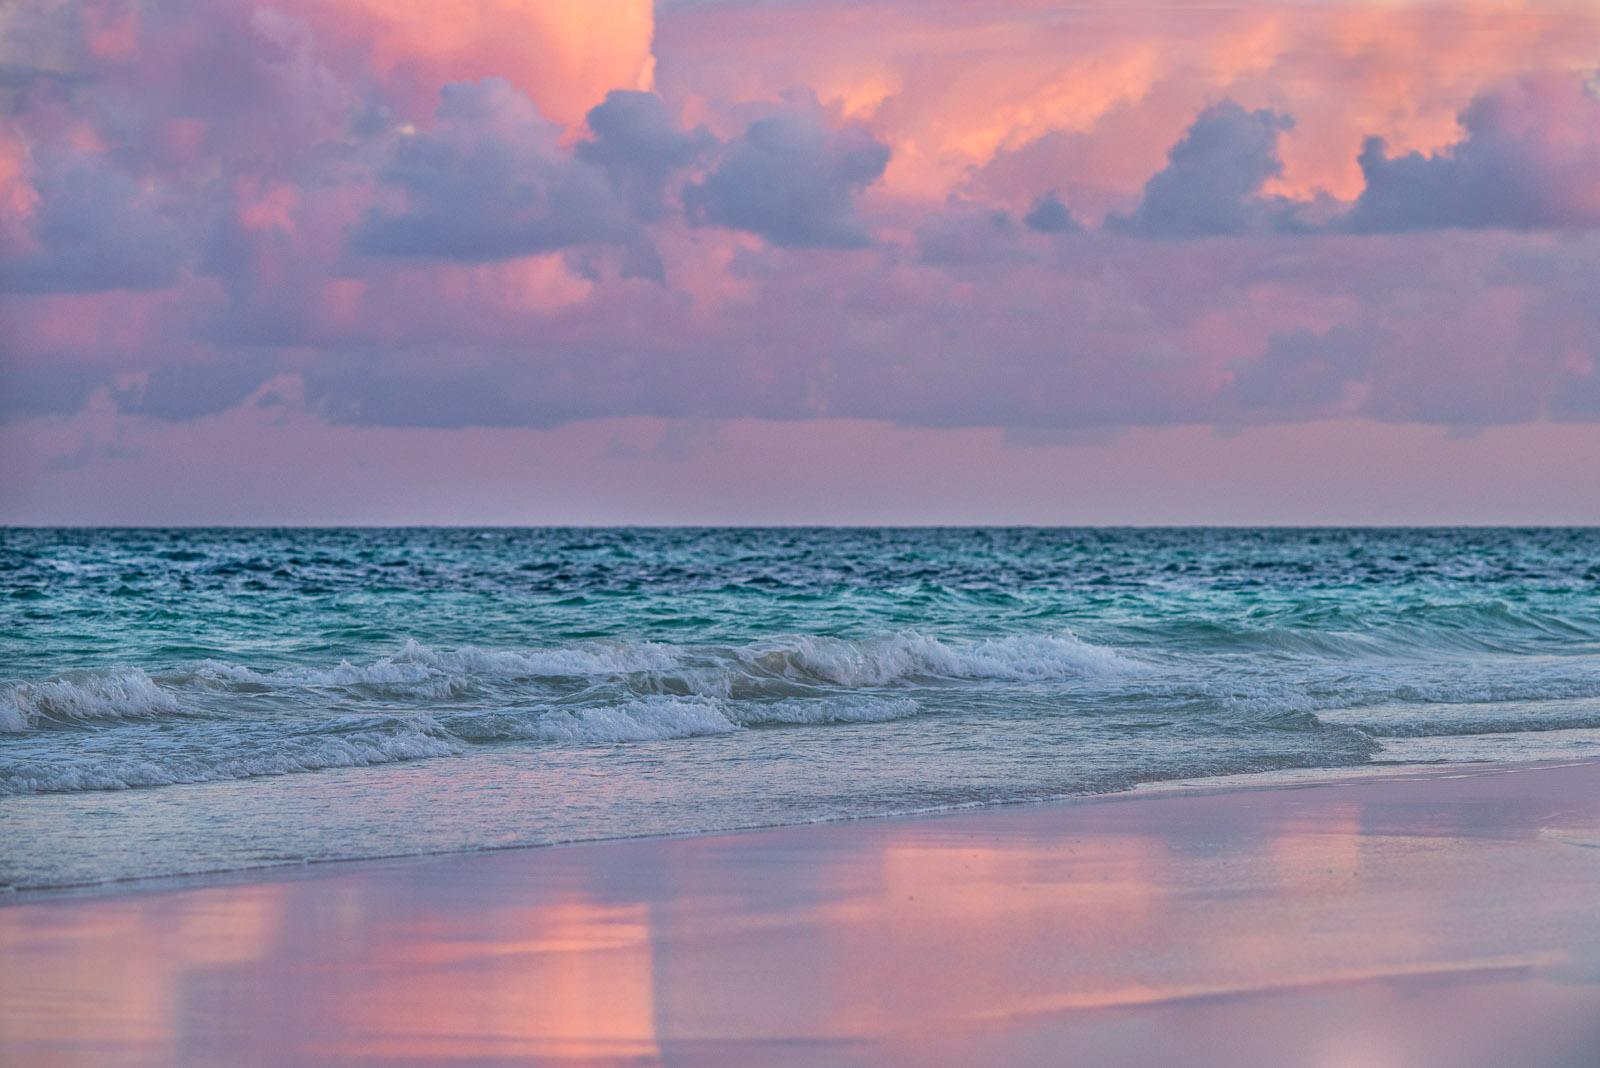 John Mazlish Landscape Photograph - "Mexican Tranquility"- Colorful & Peaceful Dusk on the Ocean, Tulum, Mexico